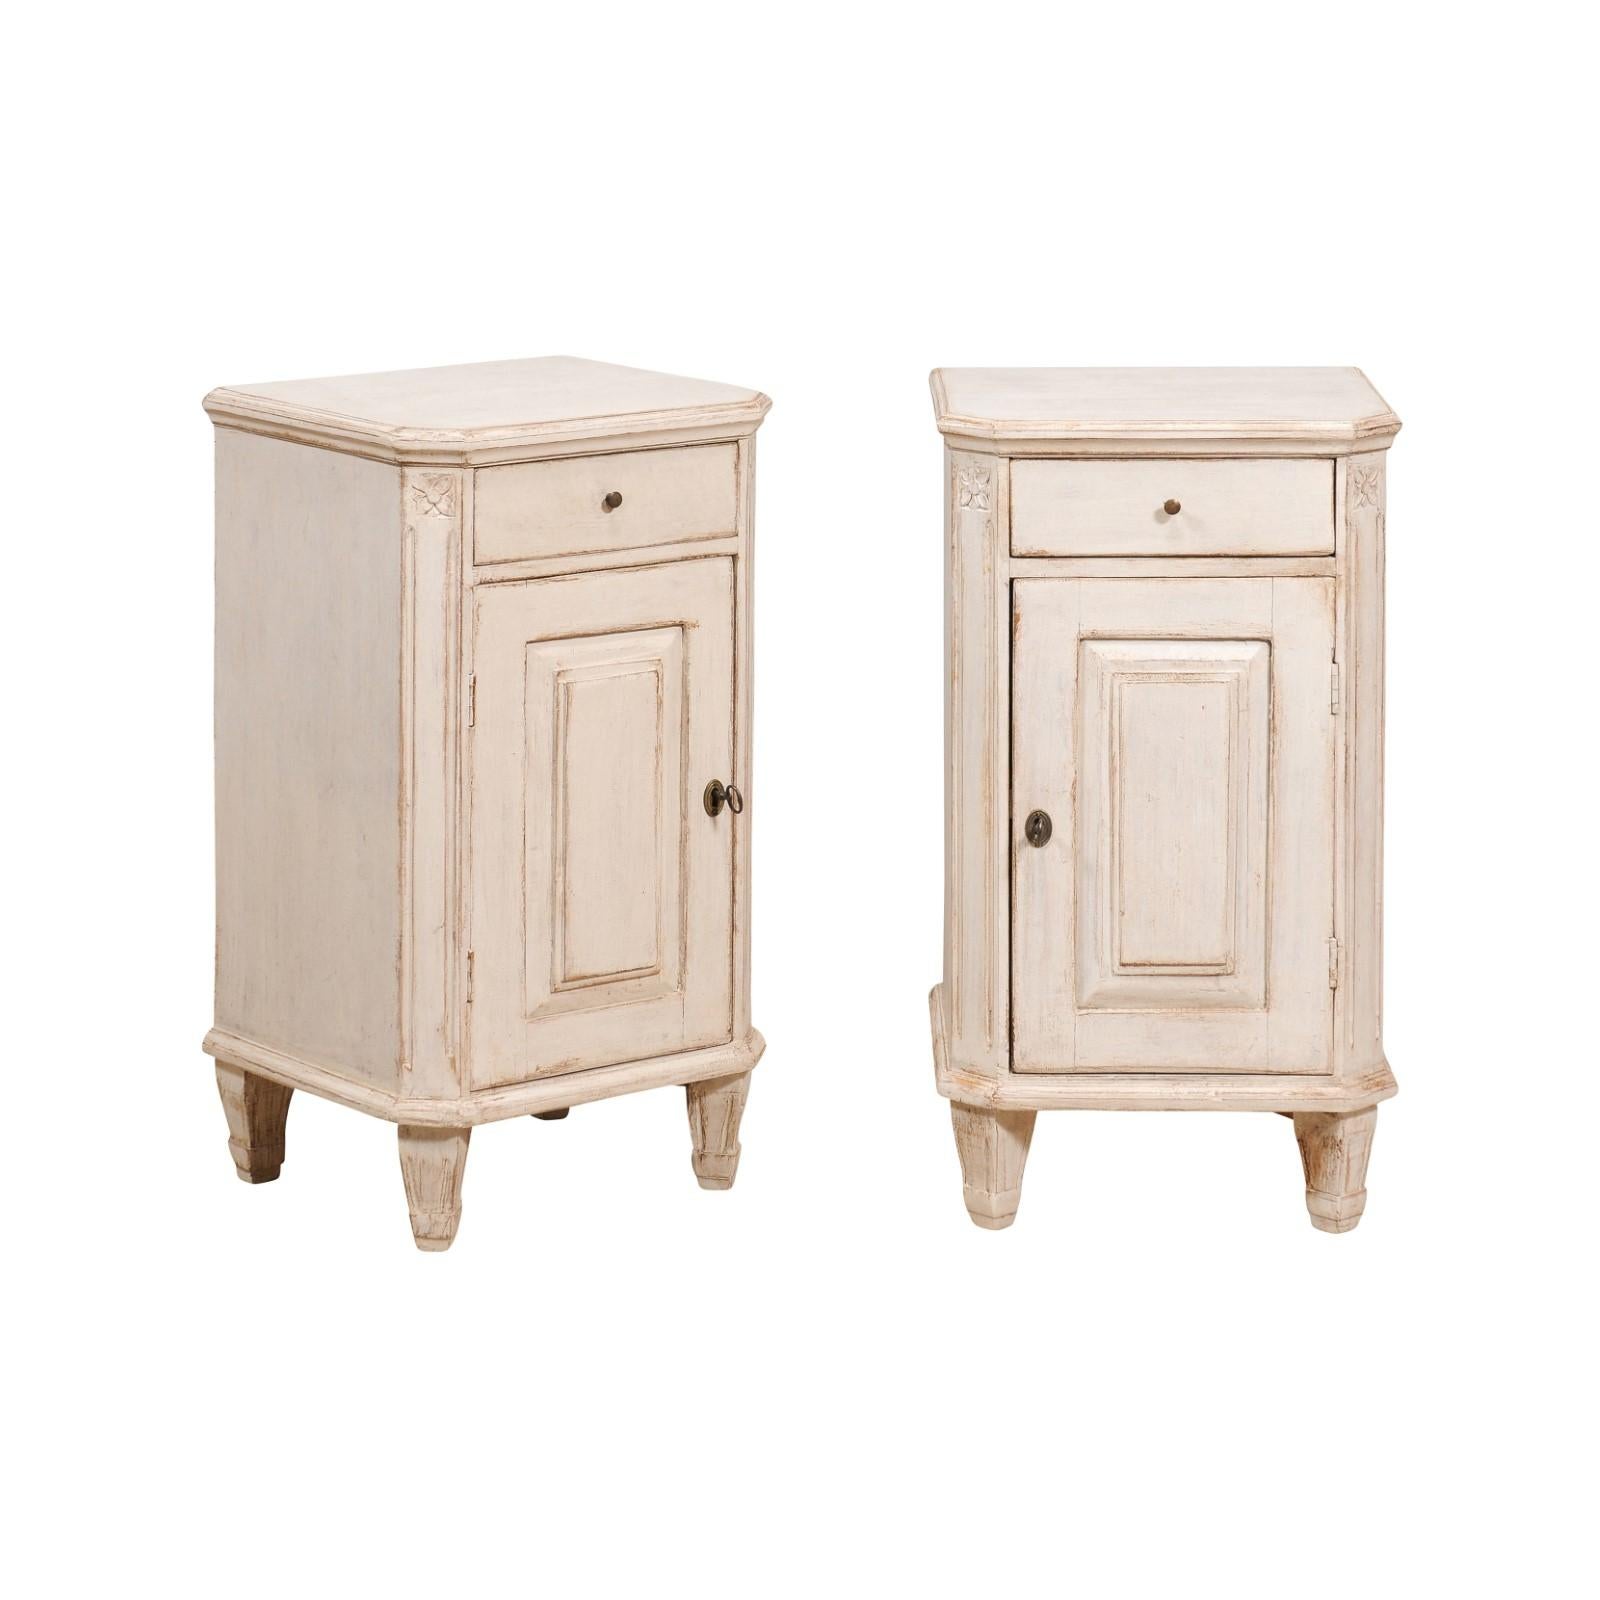 A pair of Swedish Gustavian style bedside tables from circa 1880 with light gray finish, single drawer over single door, canted side posts and tapered feet. This pair of Swedish Gustavian style bedside tables from circa 1880 exudes the serene